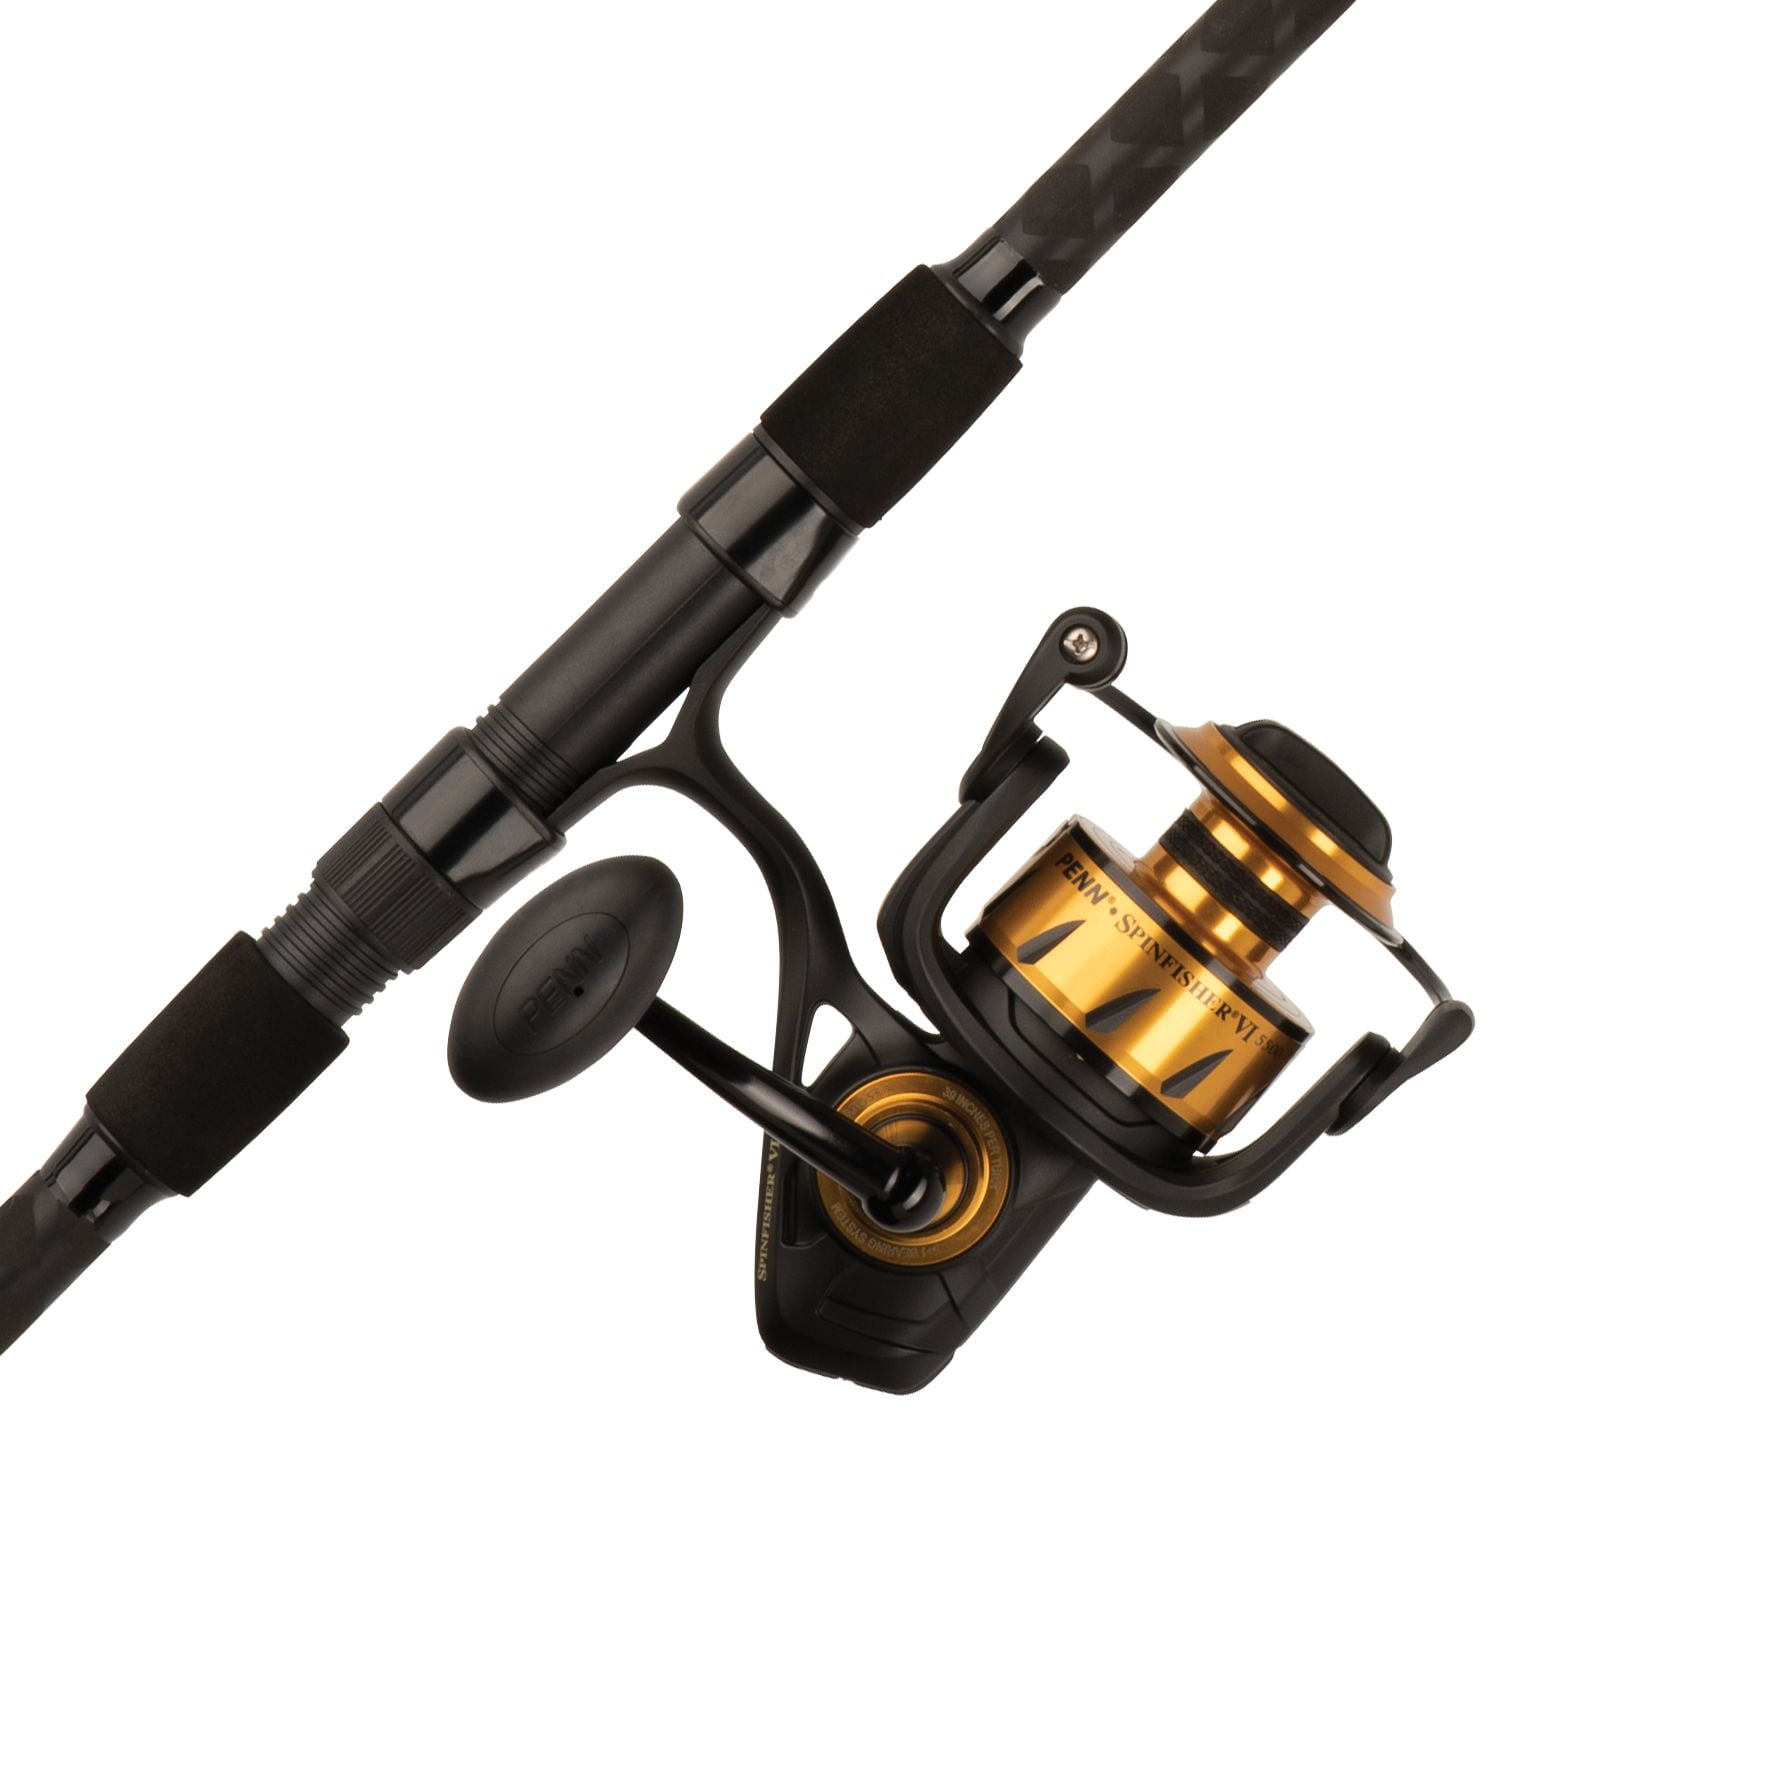 PENN Spinfisher VI Fishing Rod and Reel Spinning Combo, 6'6' 1PC